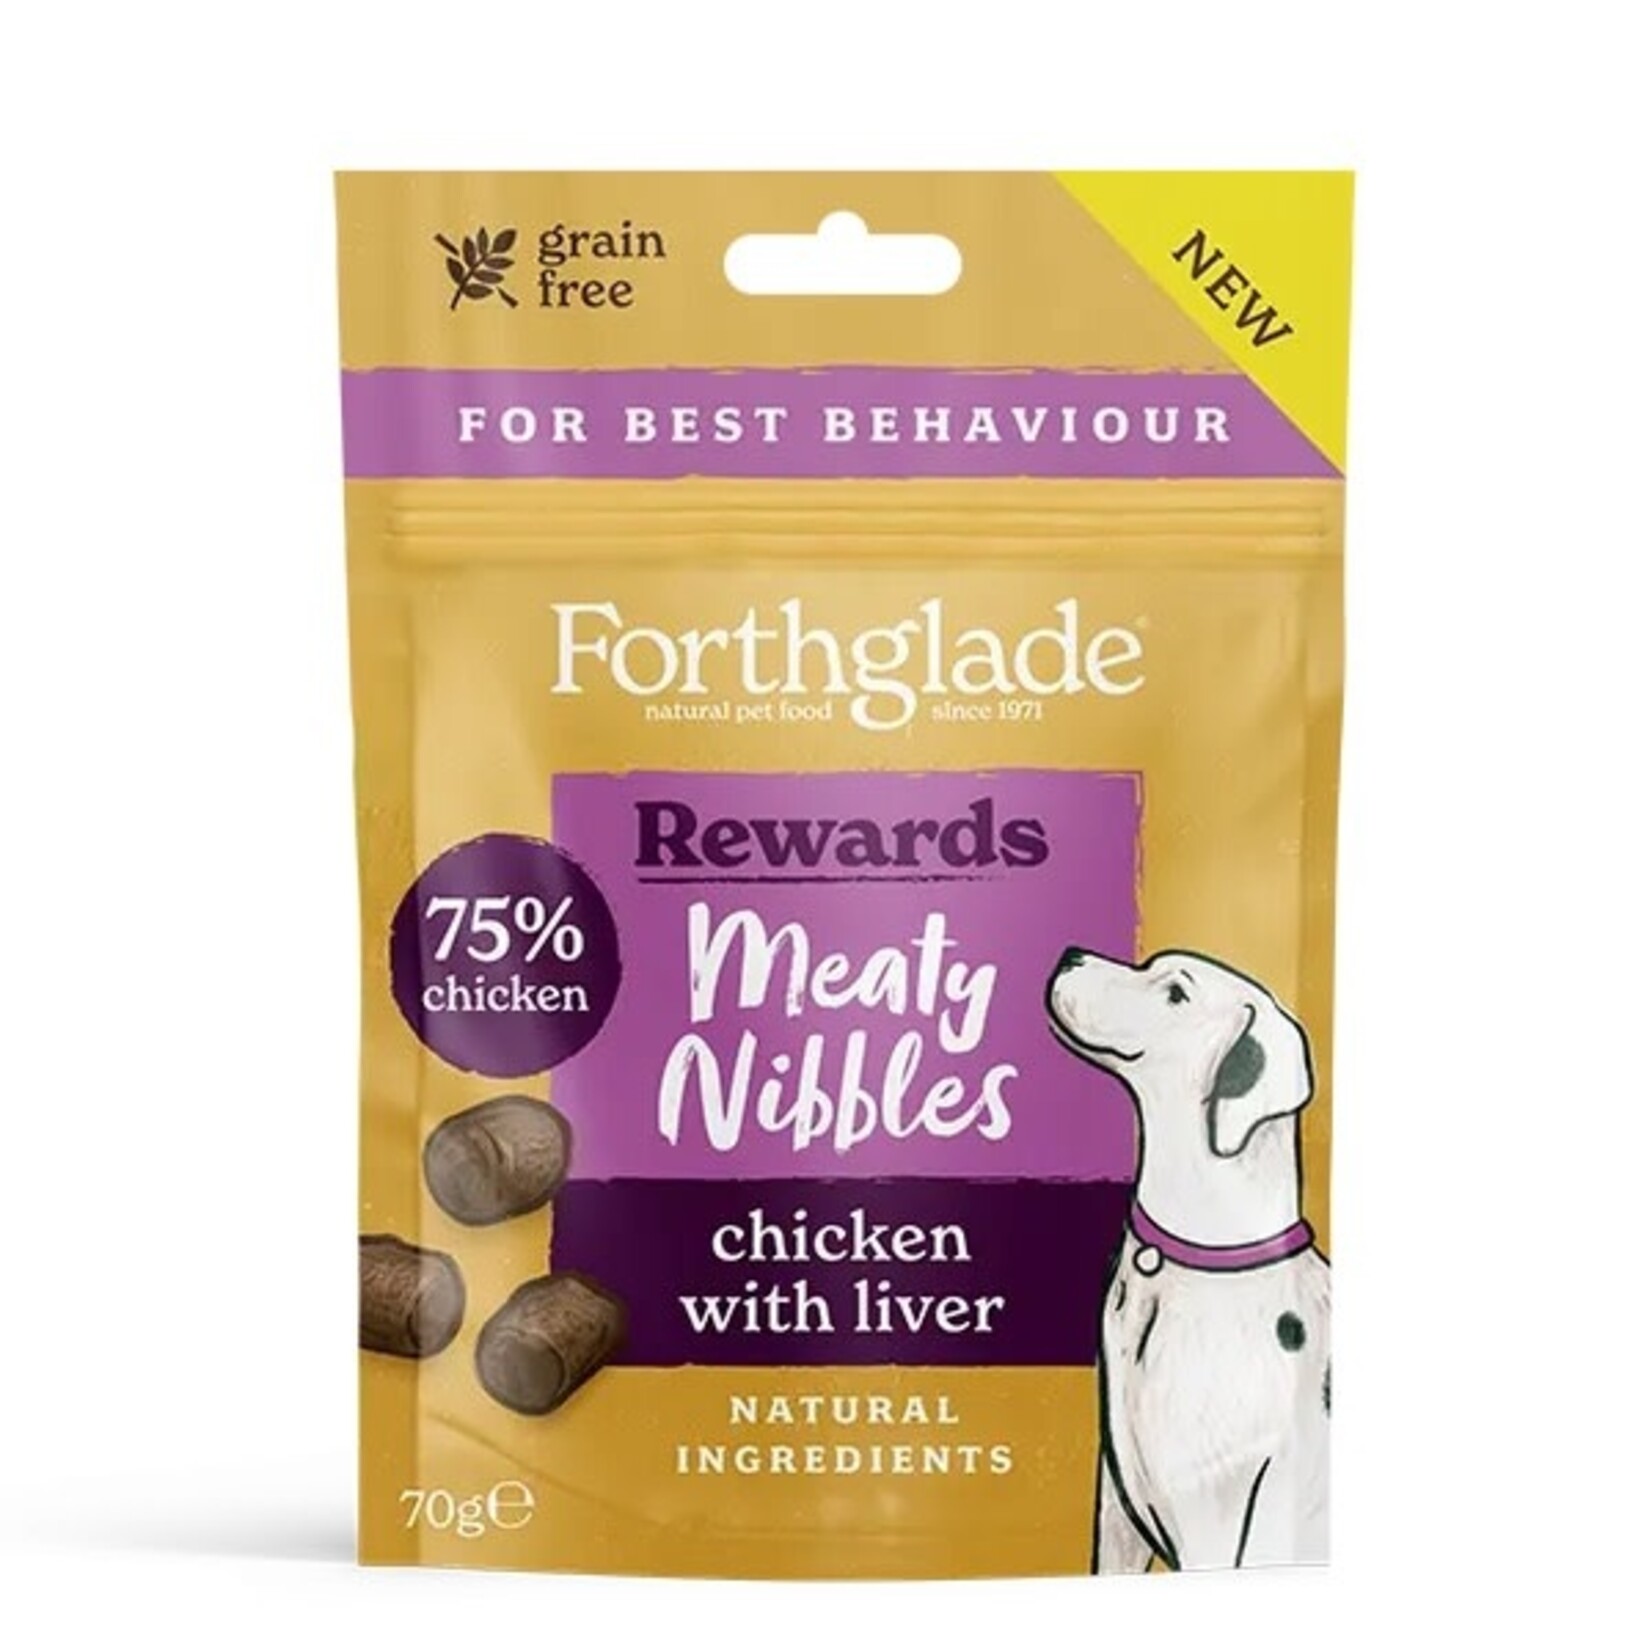 Forthglade Meaty Nibbles Grain Free Dogs Treats Chicken with Liver, 70g